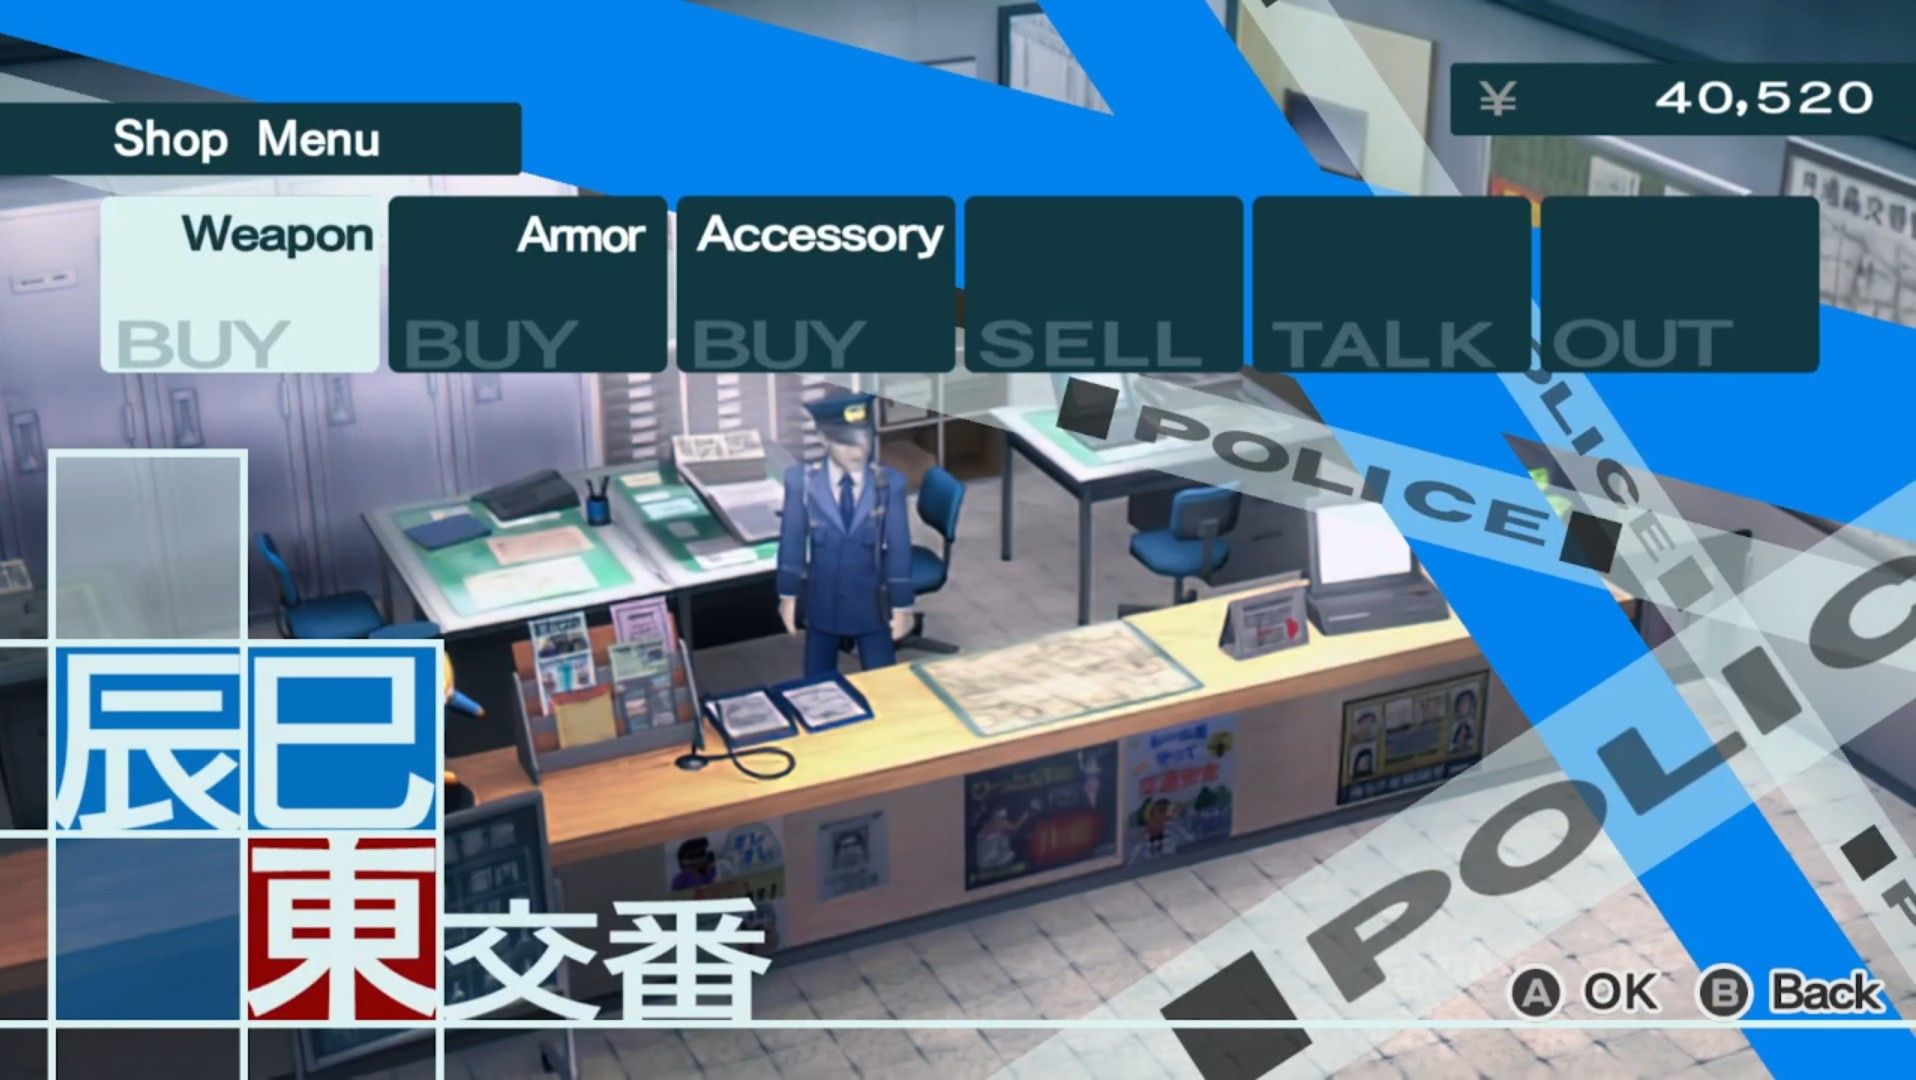 the menu at the police station for buying and selling weapons, armor, and accessories in persona 3 portable